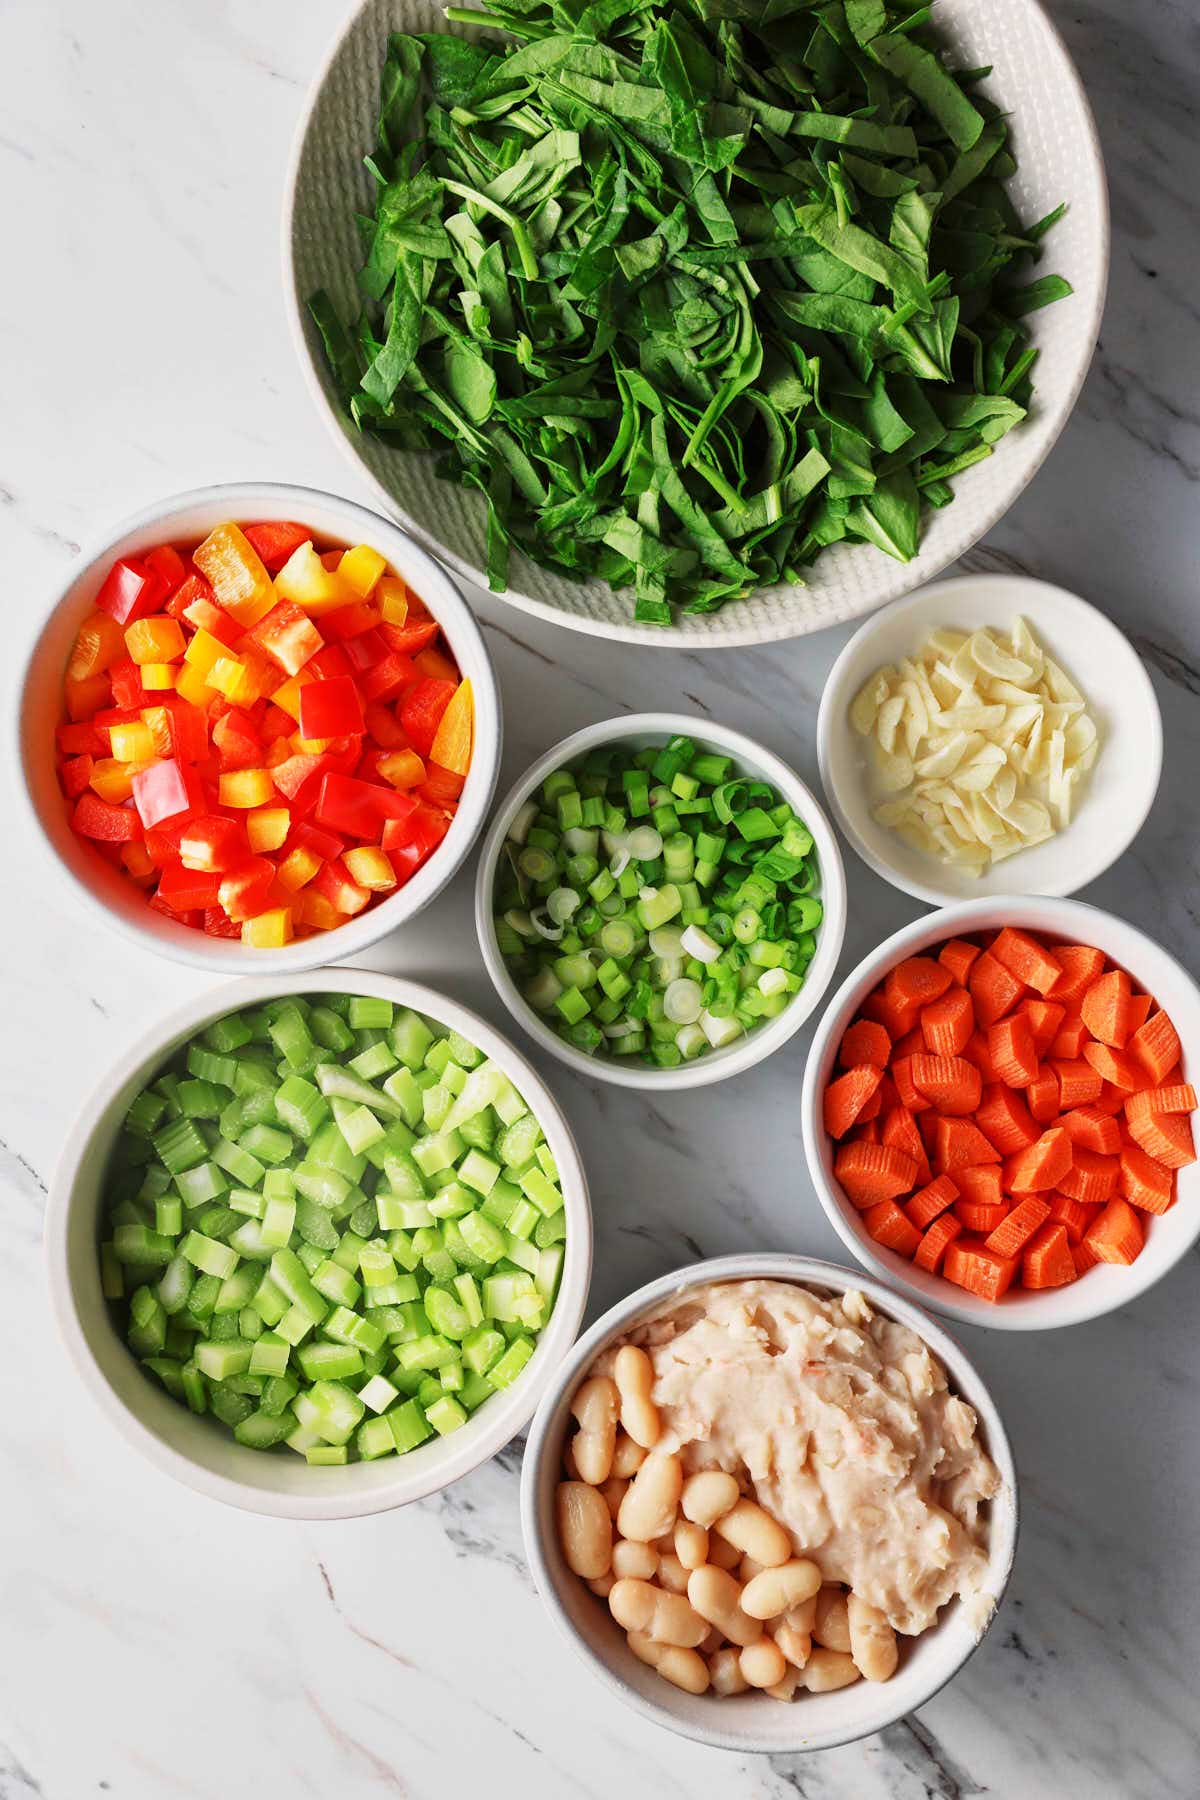 Diced vegetables, sliced garlic, and smashed and whole cannellini beans are placed in different white bowls on a flat surface.